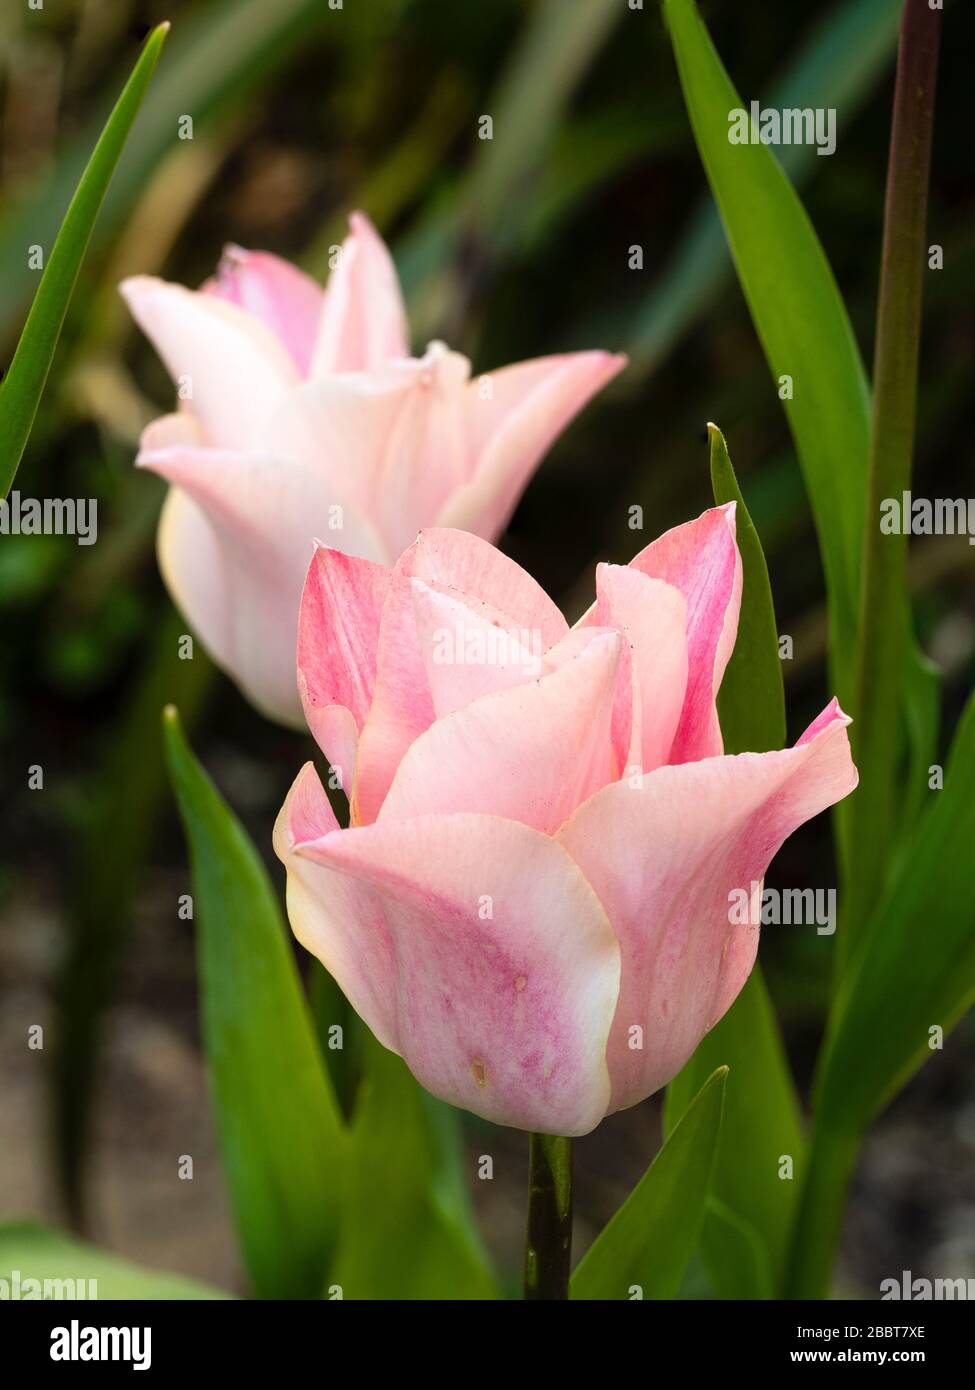 Blooms of the lily flowered hardy tulip, Tulipa 'China Pink' Stock Photo